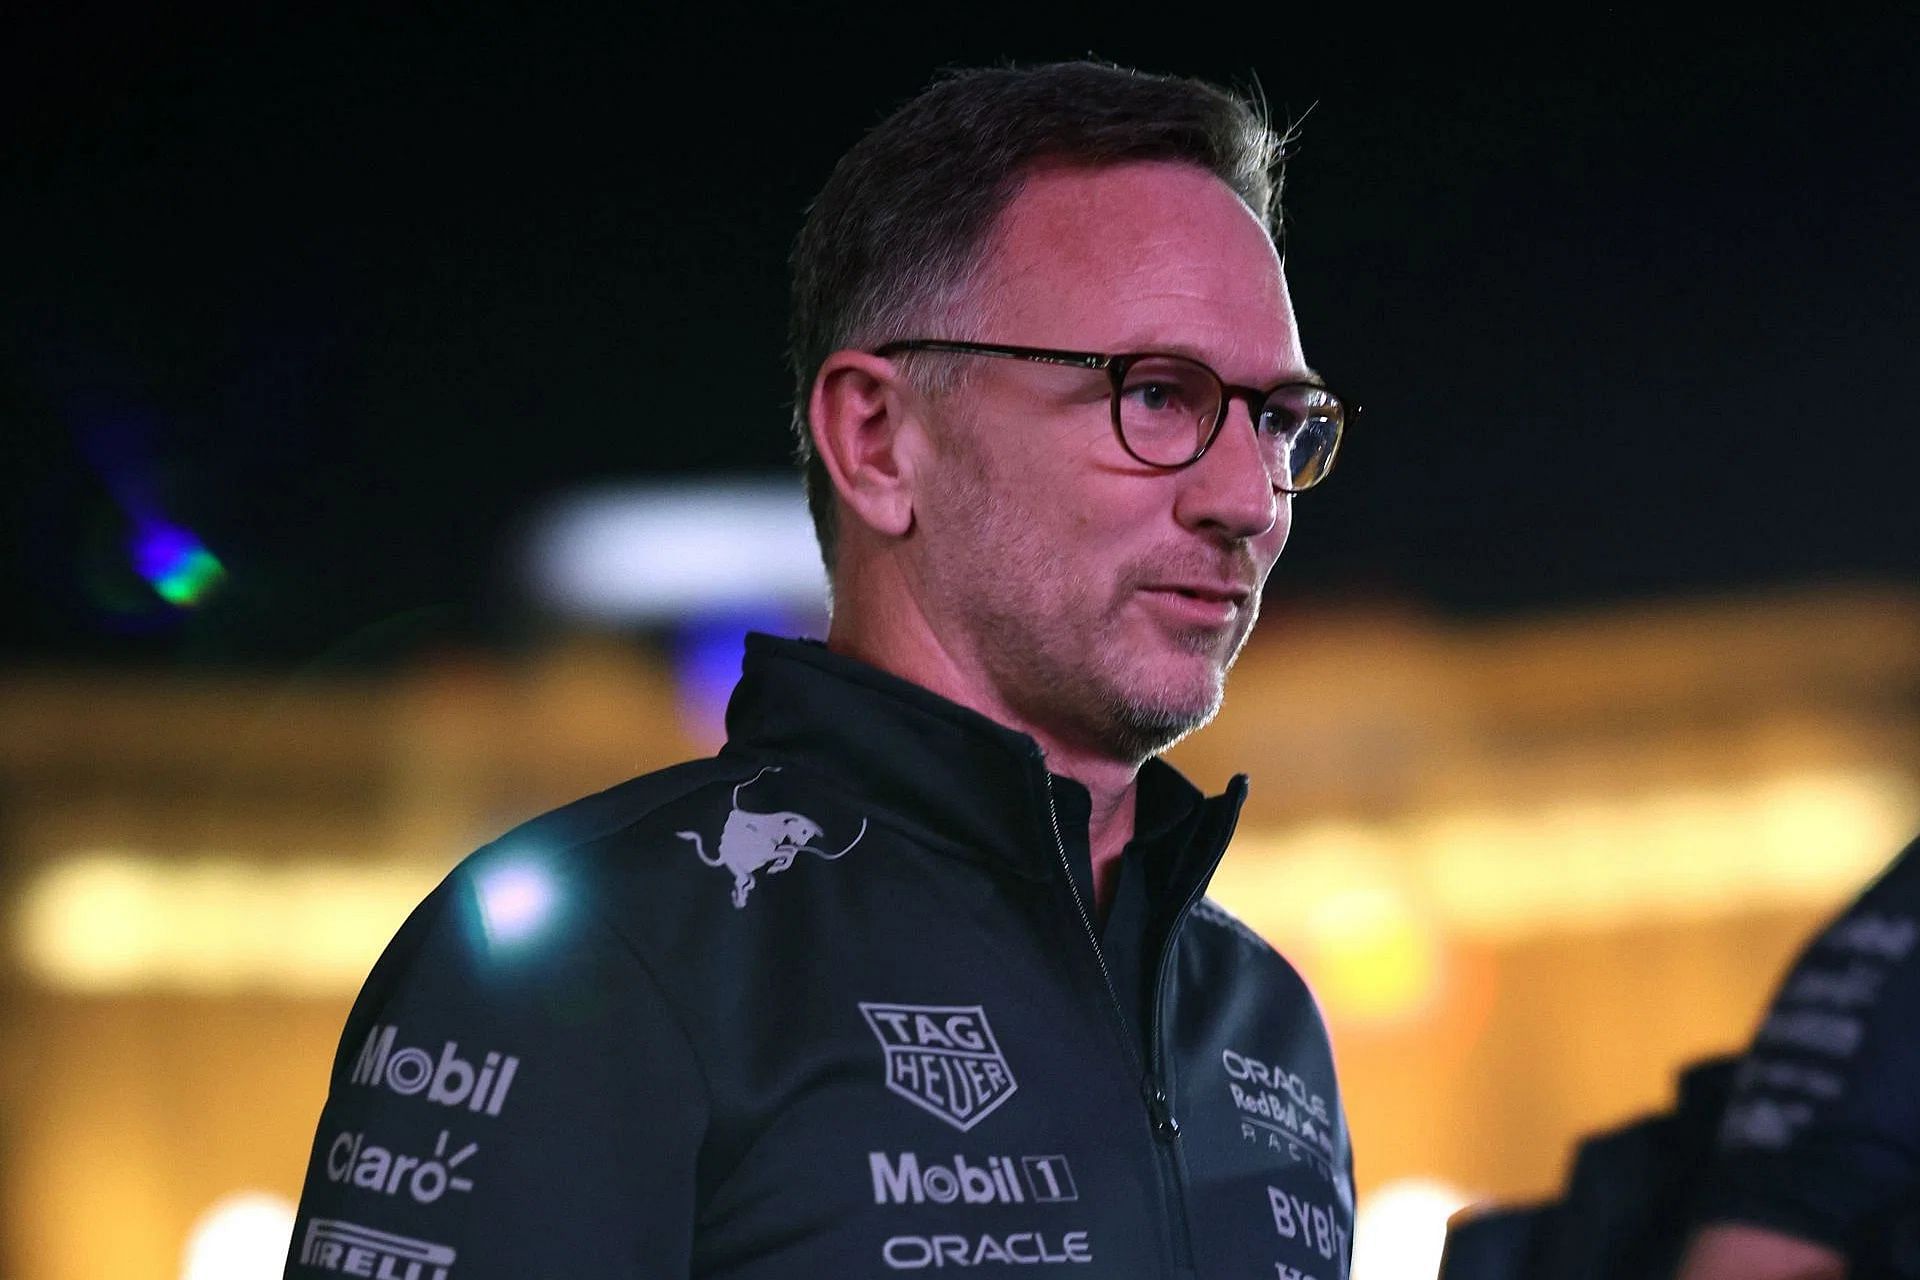 Red Bull Racing Team Principal Christian Horner walks in the paddock prior to practice ahead of the 2023 F1 Las Vegas Grand Prix. (Photo by Jared C. Tilton/Getty Images)